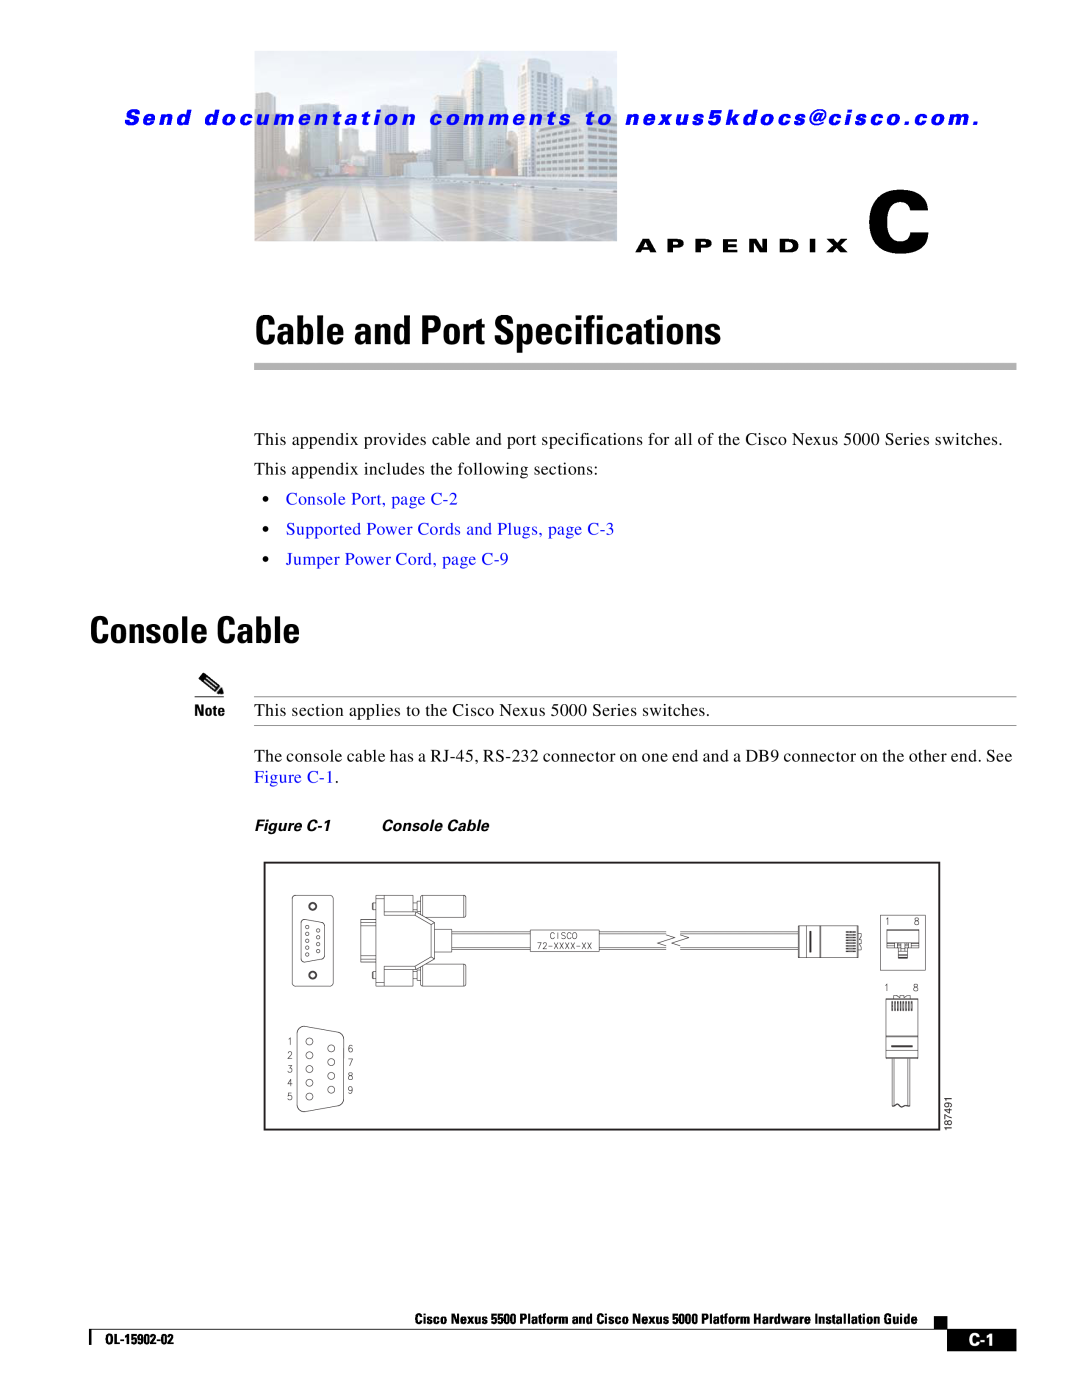 Cisco Systems 5000 manual Cable and Port Specifications, Console Cable, A P P E N D I X C, Jumper Power Cord, page C-9 